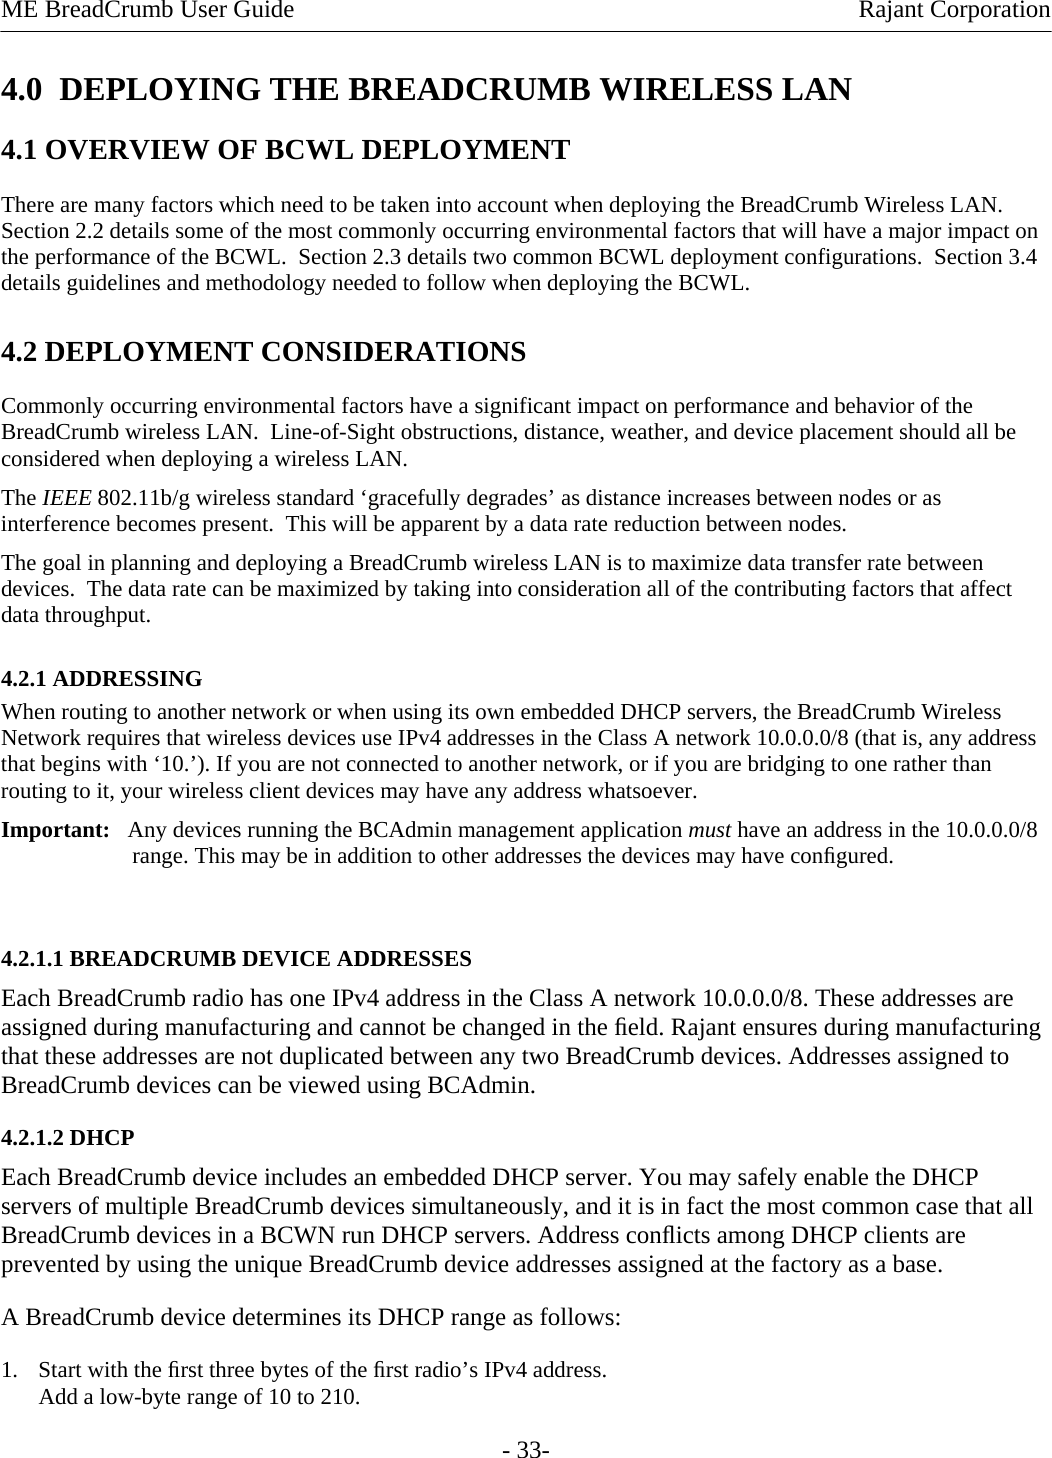 ME BreadCrumb User Guide  Rajant Corporation - 33- 4.0  DEPLOYING THE BREADCRUMB WIRELESS LAN 4.1 OVERVIEW OF BCWL DEPLOYMENT There are many factors which need to be taken into account when deploying the BreadCrumb Wireless LAN.  Section 2.2 details some of the most commonly occurring environmental factors that will have a major impact on the performance of the BCWL.  Section 2.3 details two common BCWL deployment configurations.  Section 3.4 details guidelines and methodology needed to follow when deploying the BCWL. 4.2 DEPLOYMENT CONSIDERATIONS Commonly occurring environmental factors have a significant impact on performance and behavior of the BreadCrumb wireless LAN.  Line-of-Sight obstructions, distance, weather, and device placement should all be considered when deploying a wireless LAN. The IEEE 802.11b/g wireless standard ‘gracefully degrades’ as distance increases between nodes or as interference becomes present.  This will be apparent by a data rate reduction between nodes. The goal in planning and deploying a BreadCrumb wireless LAN is to maximize data transfer rate between devices.  The data rate can be maximized by taking into consideration all of the contributing factors that affect data throughput.   4.2.1 ADDRESSING  When routing to another network or when using its own embedded DHCP servers, the BreadCrumb Wireless Network requires that wireless devices use IPv4 addresses in the Class A network 10.0.0.0/8 (that is, any address that begins with ‘10.’). If you are not connected to another network, or if you are bridging to one rather than routing to it, your wireless client devices may have any address whatsoever.  Important:   Any devices running the BCAdmin management application must have an address in the 10.0.0.0/8 range. This may be in addition to other addresses the devices may have conﬁgured.   4.2.1.1 BREADCRUMB DEVICE ADDRESSES  Each BreadCrumb radio has one IPv4 address in the Class A network 10.0.0.0/8. These addresses are assigned during manufacturing and cannot be changed in the ﬁeld. Rajant ensures during manufacturing that these addresses are not duplicated between any two BreadCrumb devices. Addresses assigned to BreadCrumb devices can be viewed using BCAdmin.  4.2.1.2 DHCP  Each BreadCrumb device includes an embedded DHCP server. You may safely enable the DHCP servers of multiple BreadCrumb devices simultaneously, and it is in fact the most common case that all BreadCrumb devices in a BCWN run DHCP servers. Address conﬂicts among DHCP clients are prevented by using the unique BreadCrumb device addresses assigned at the factory as a base.  A BreadCrumb device determines its DHCP range as follows:  1. Start with the ﬁrst three bytes of the ﬁrst radio’s IPv4 address.  Add a low-byte range of 10 to 210.  